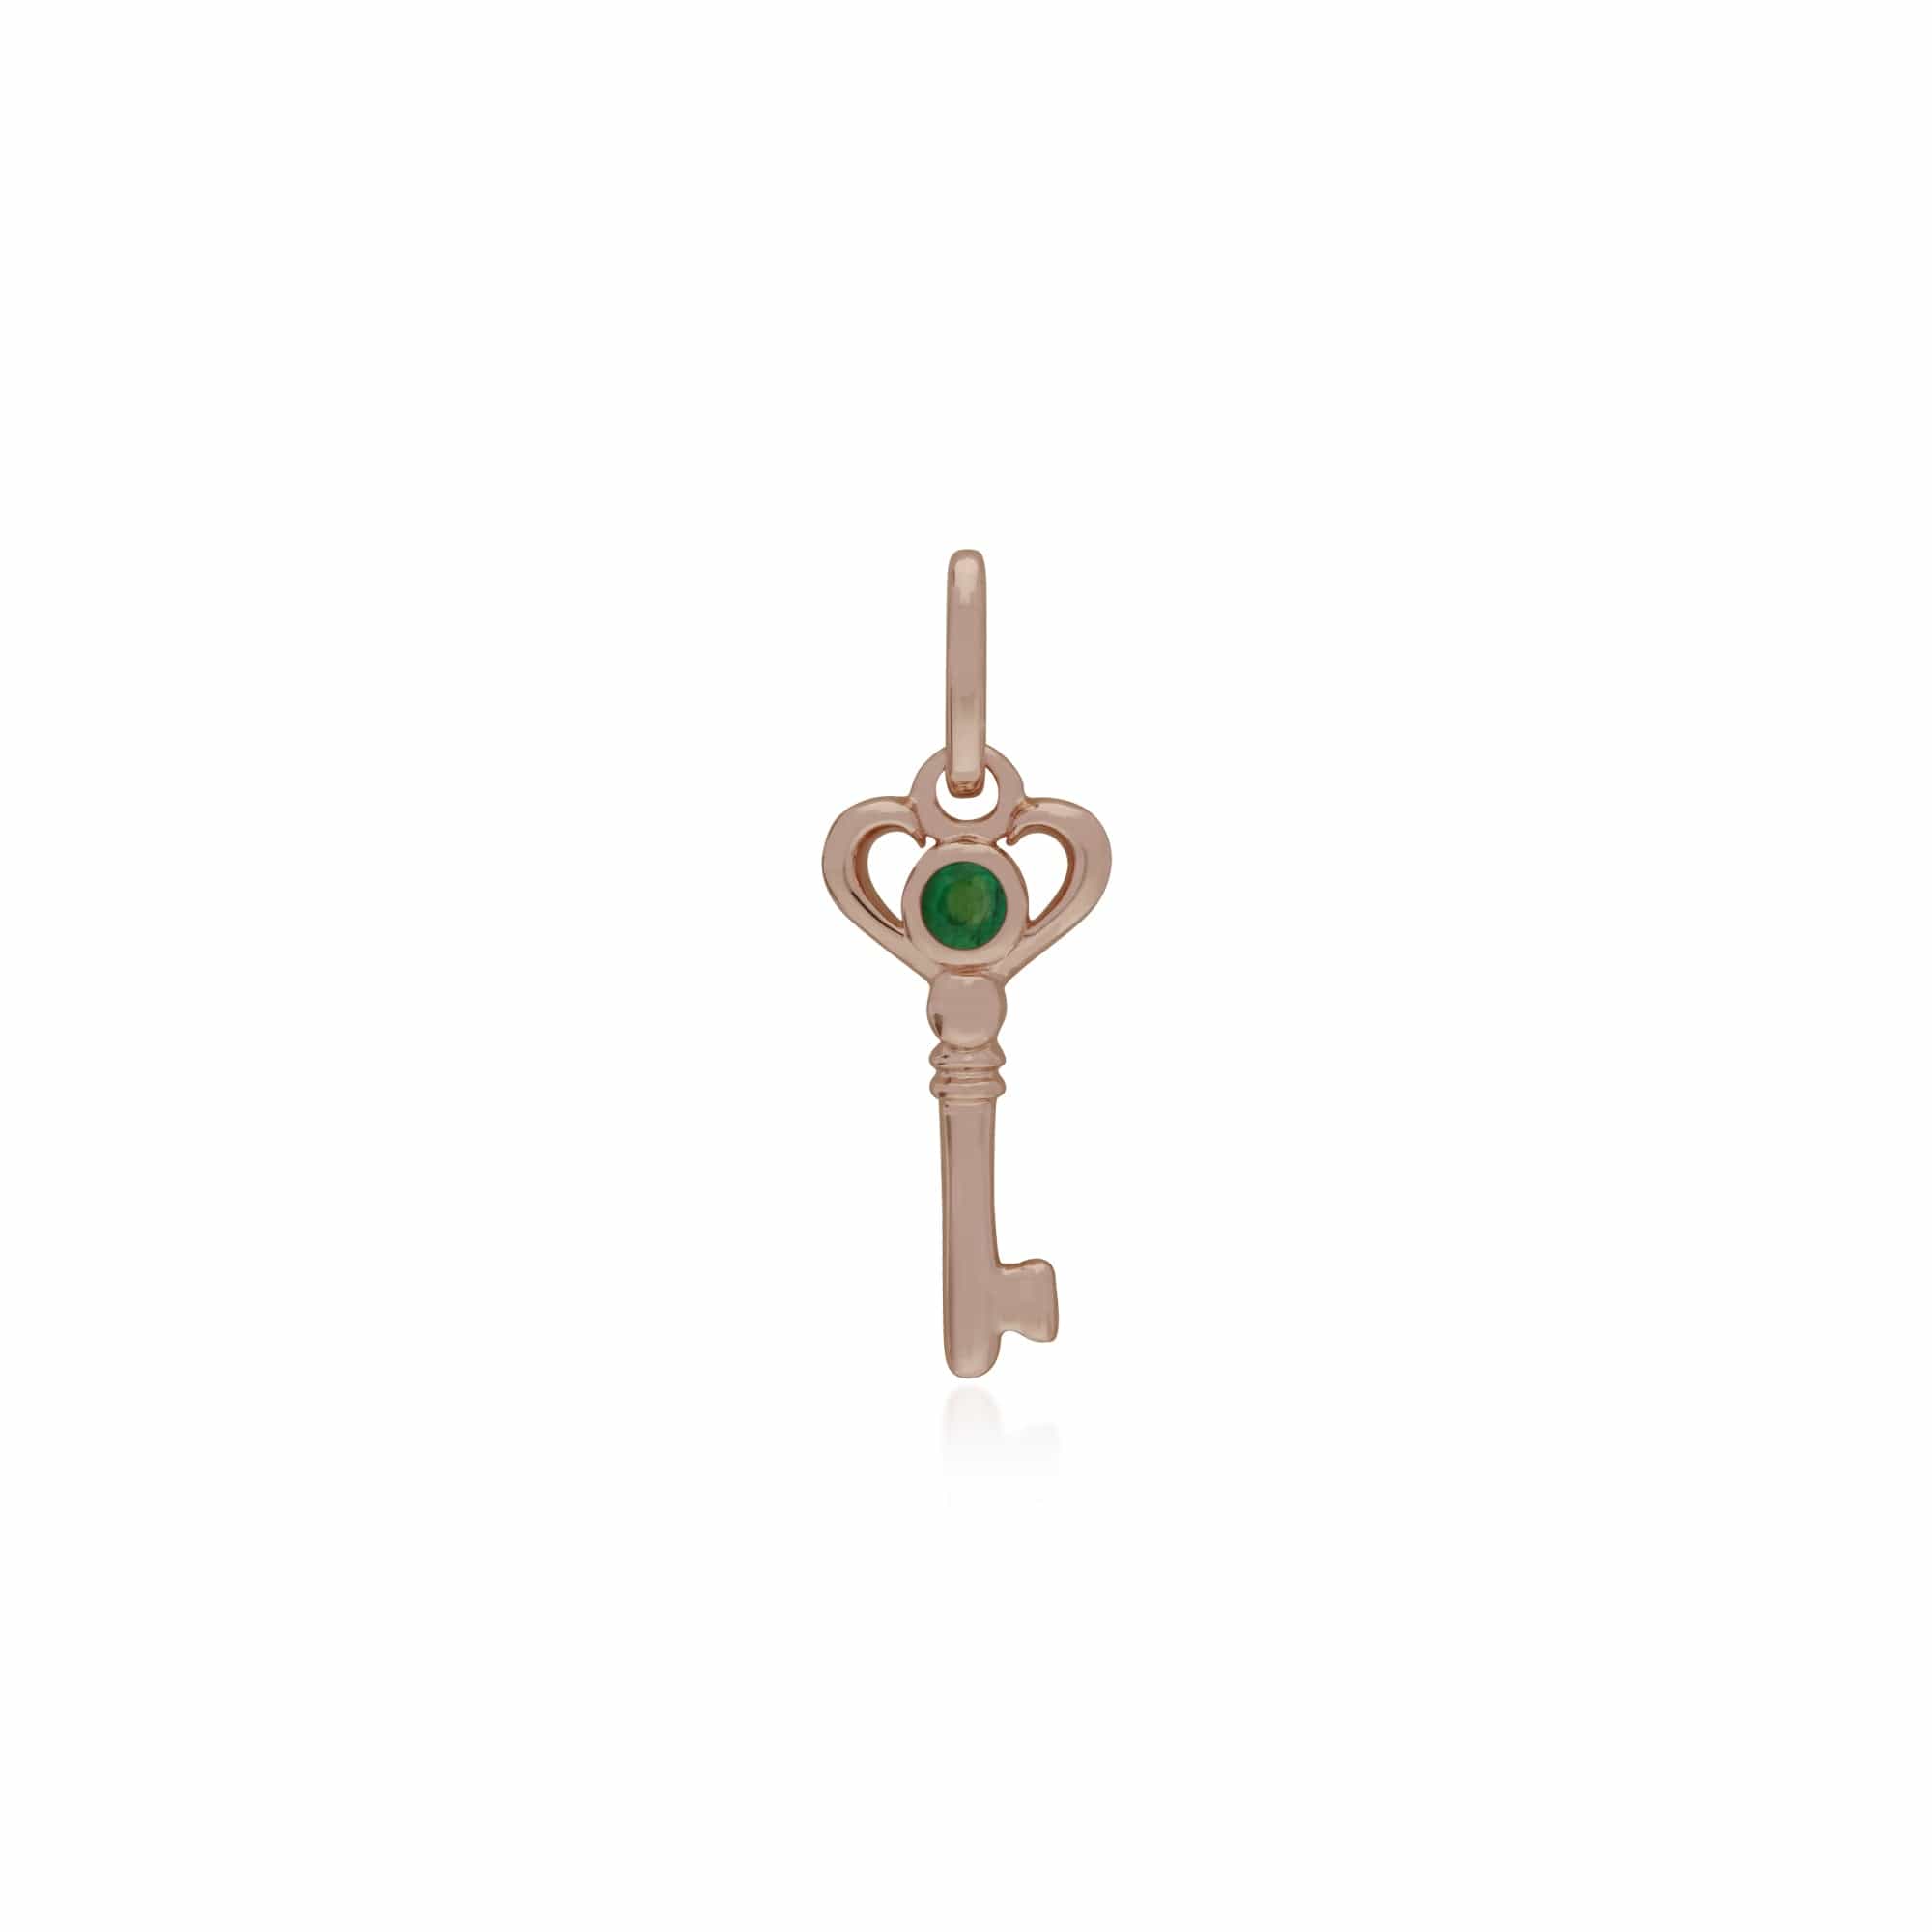 270P026303925-270P026901925 Classic Heart Lock Pendant & Emerald Key Charm in Rose Gold Plated 925 Sterling Silver 2